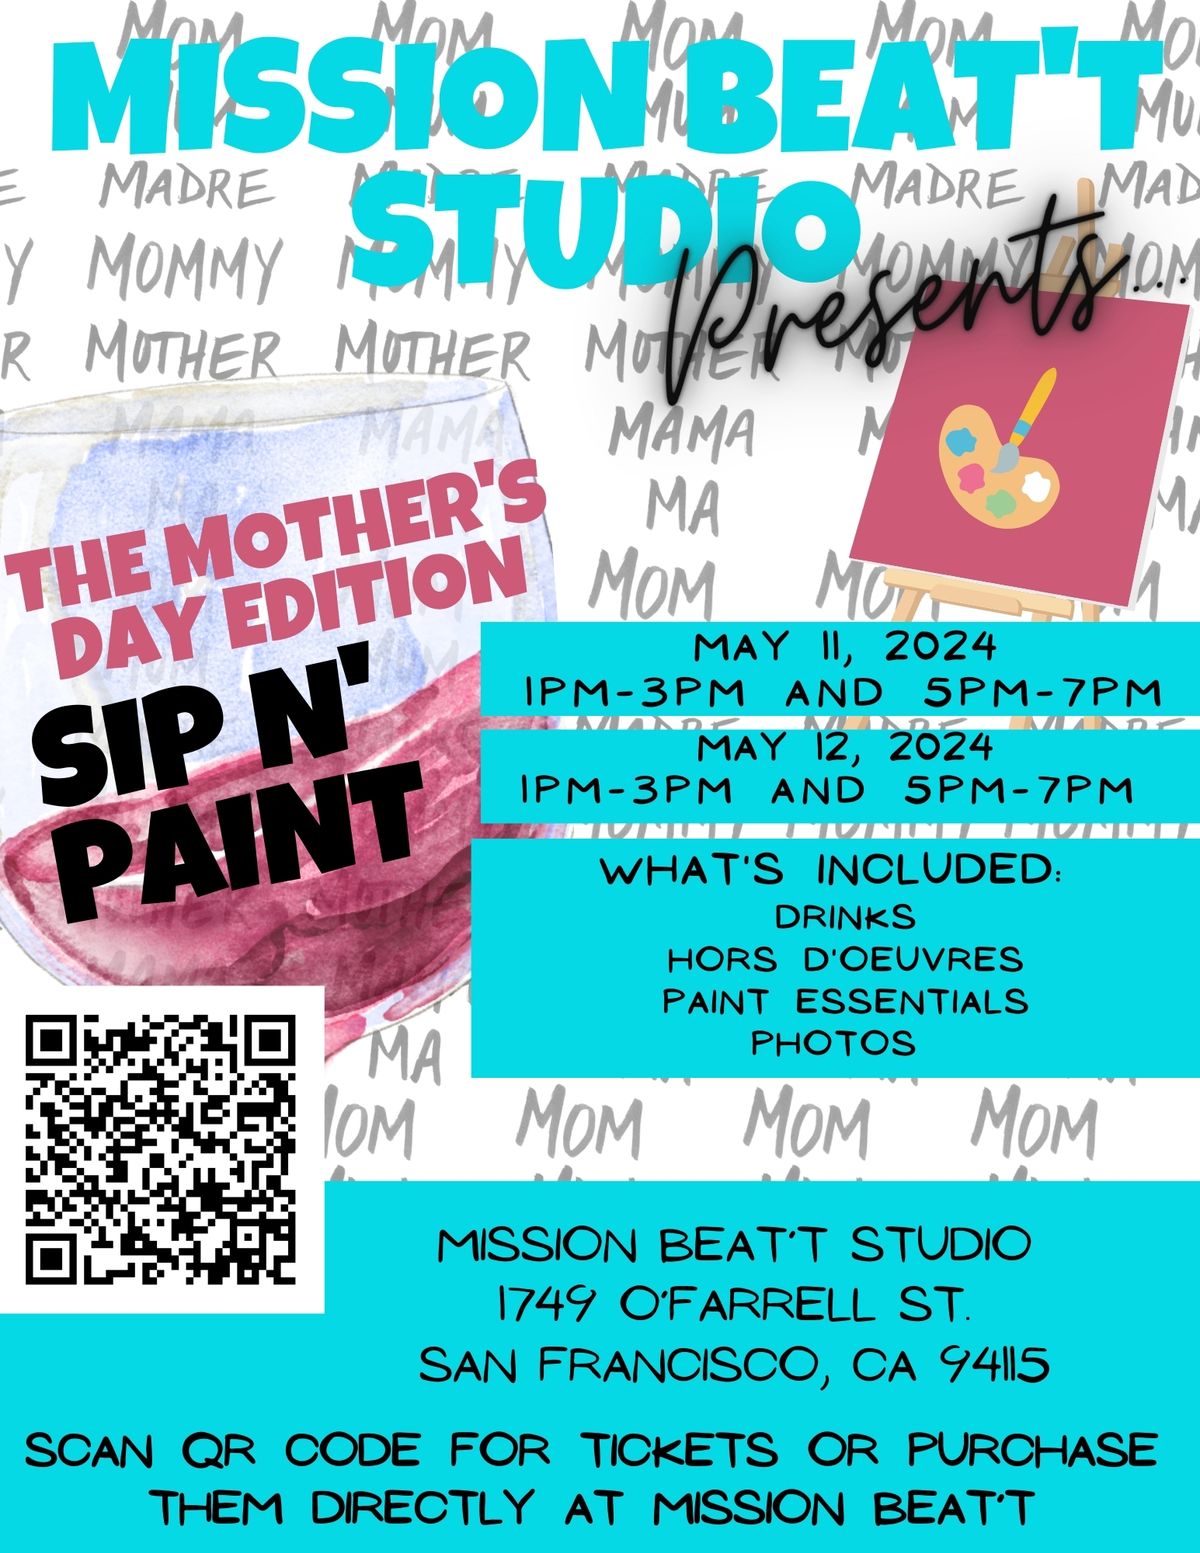 Mission Beat'T Studio: Mother's Day Sip N' Paint